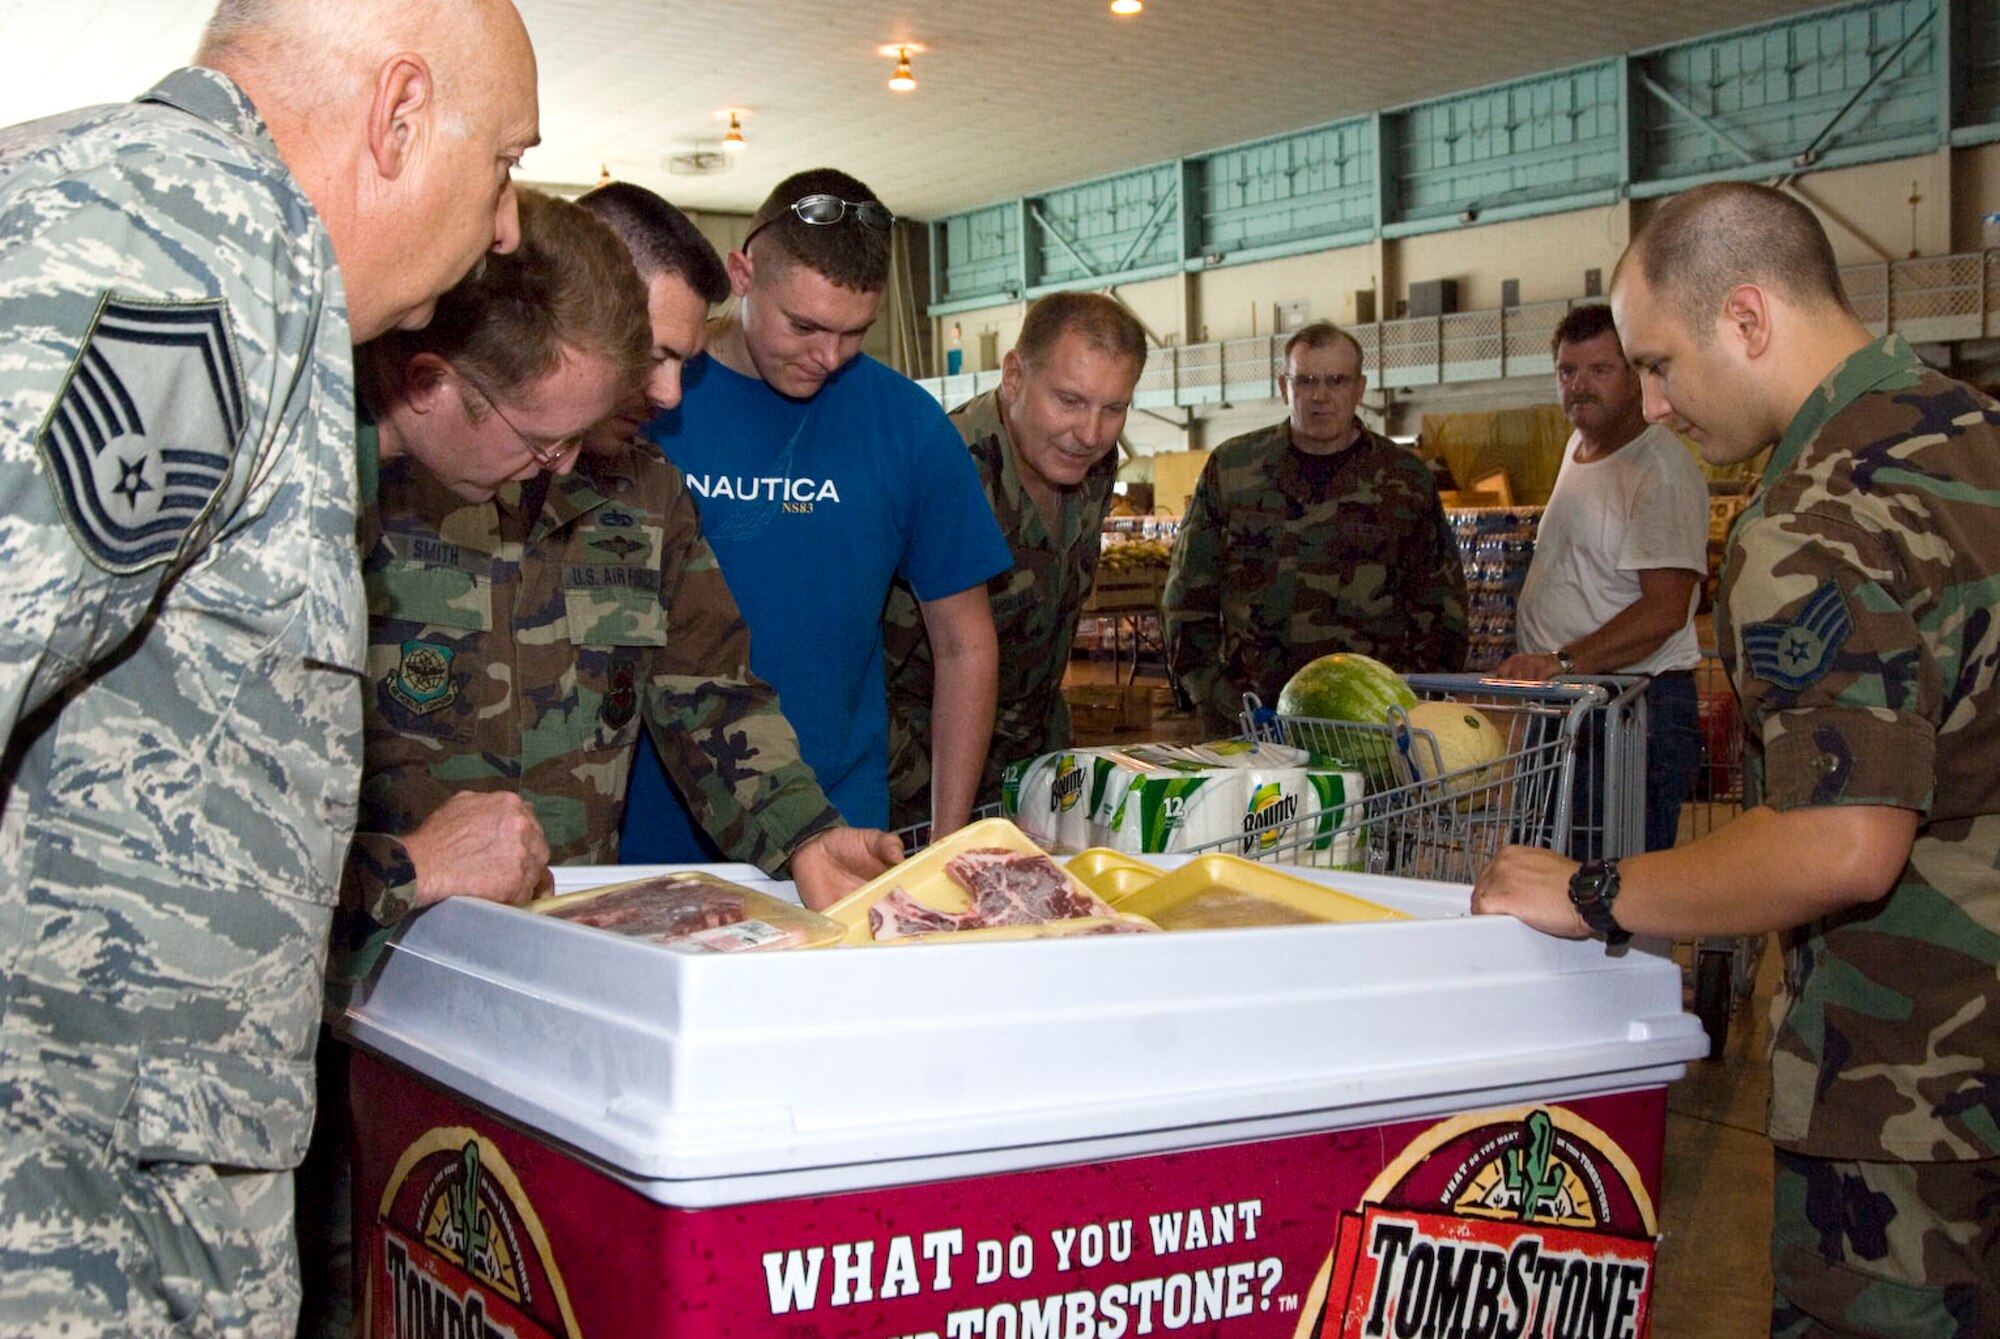 Members of the 167th Airlift Wing, West Virginia Air National Guard, gather around a freezer full of steaks on sale during the Andrews Air Force Base Commissary On-Site Sale held at the Martinsburg, W.Va. air base on Friday July 10, 2009 (U.S. Air Force photo by Master Sgt Emily Beightol-Deyerle)